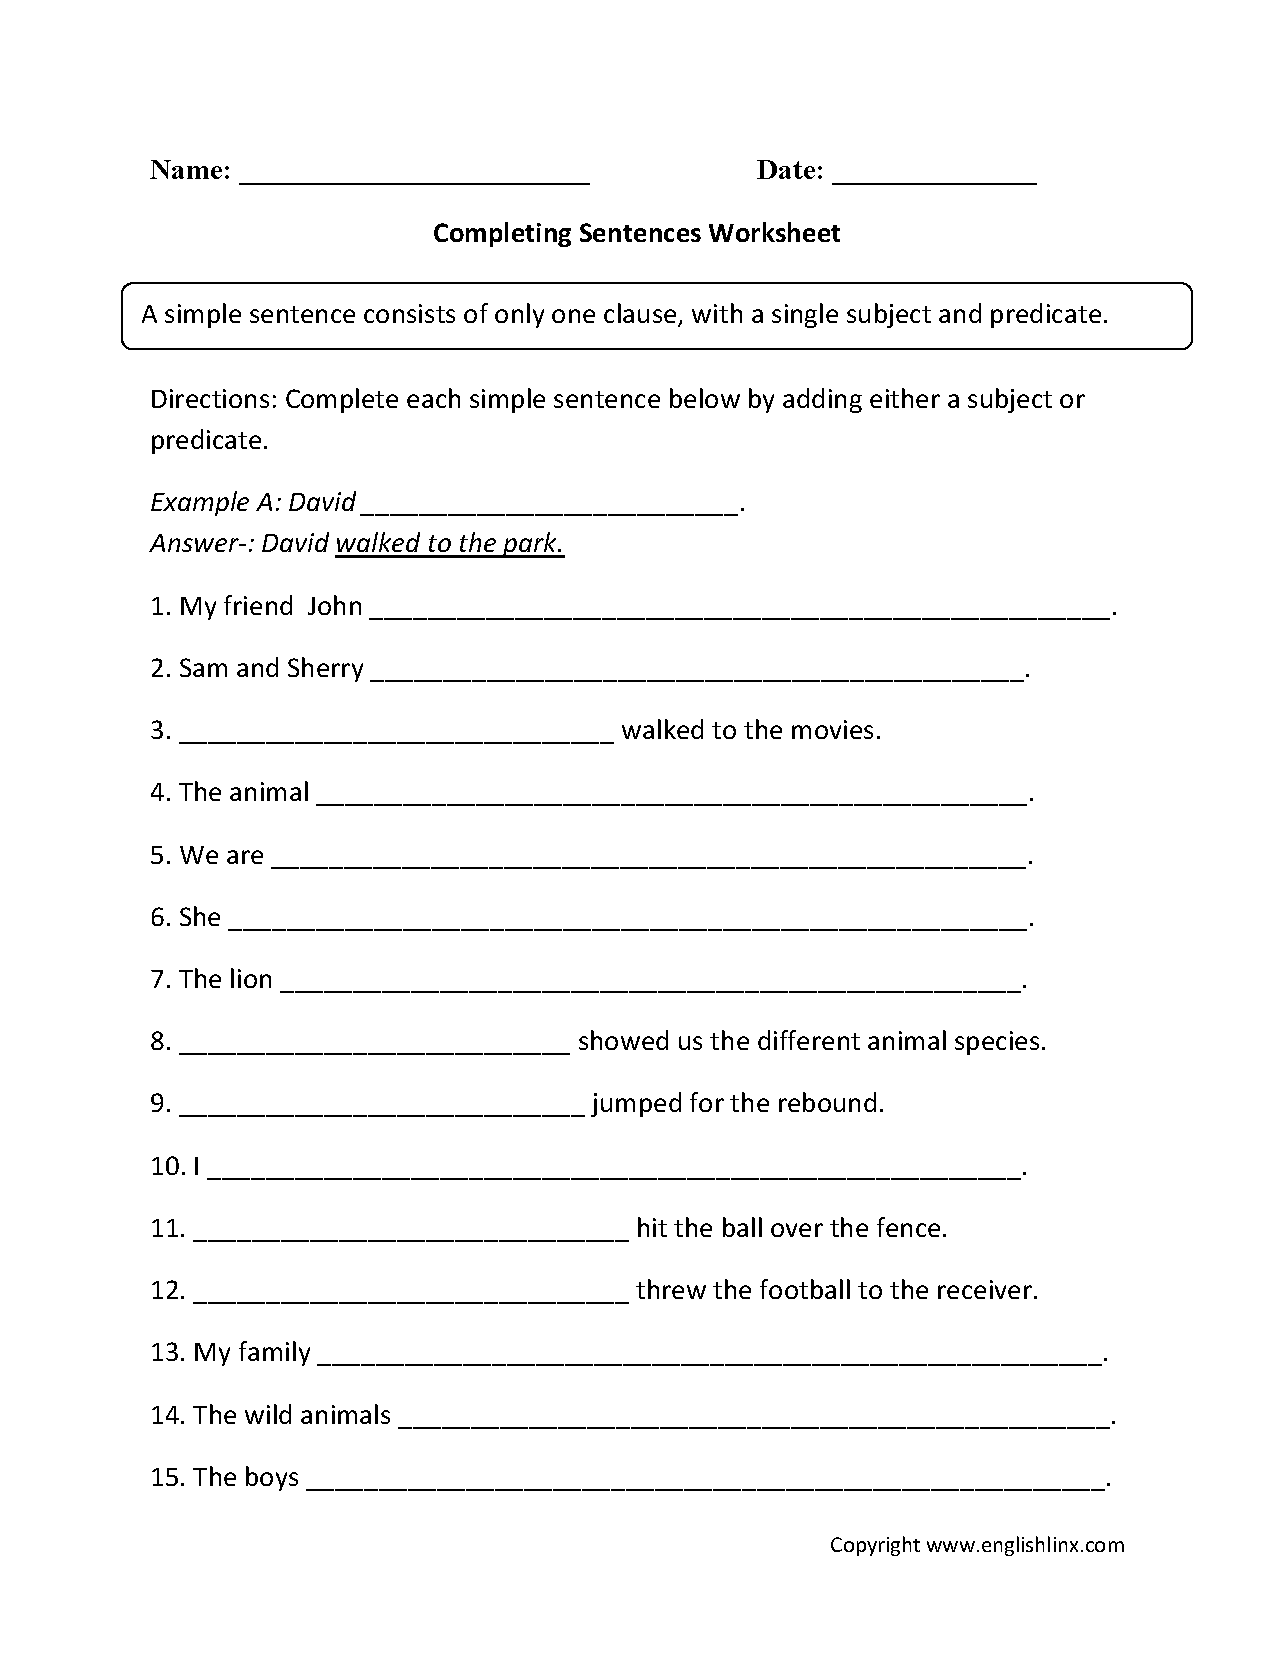 16 Best Images Of Complete Sentence Worksheets 4th Grade Simple Subject And Predicate